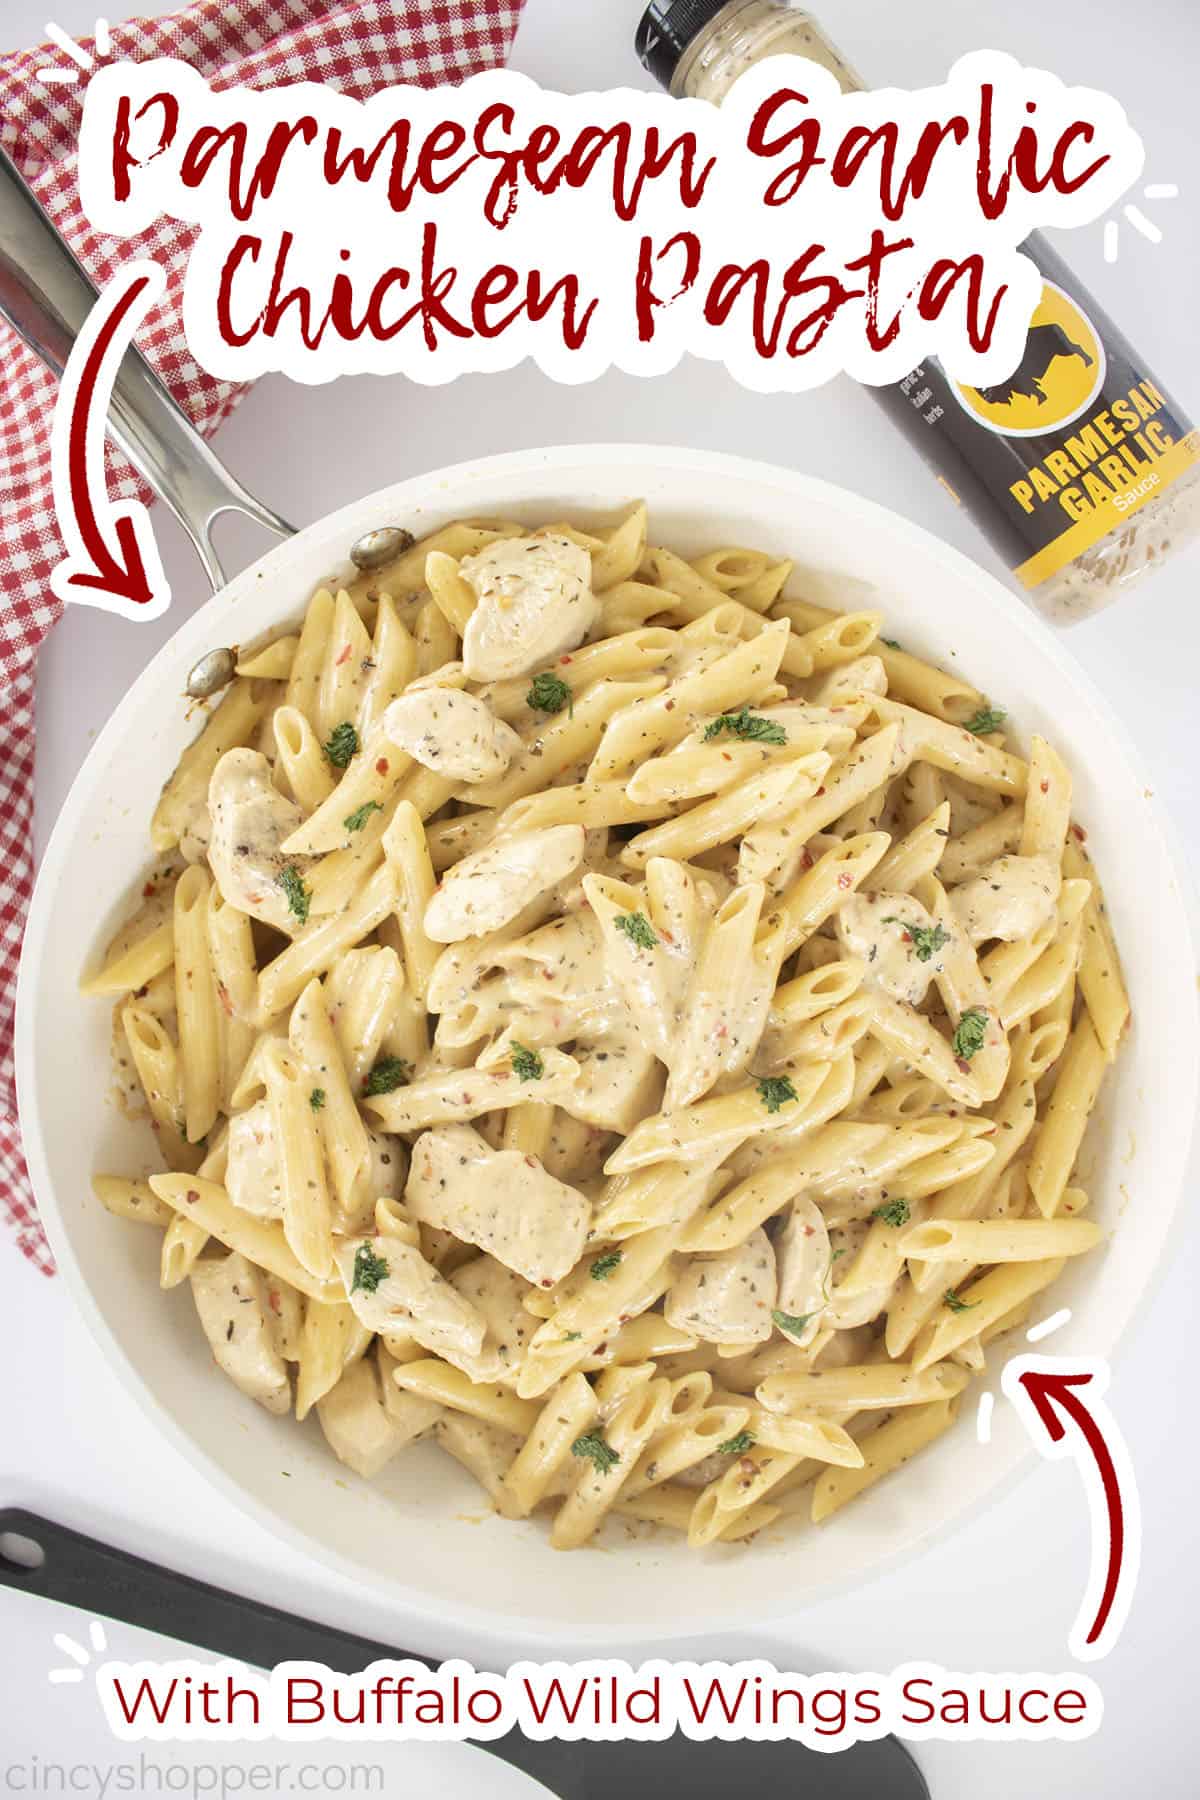 Text on image Parmesan Garlic Chicken Pasta with Buffalo Wild Wings Sauce.